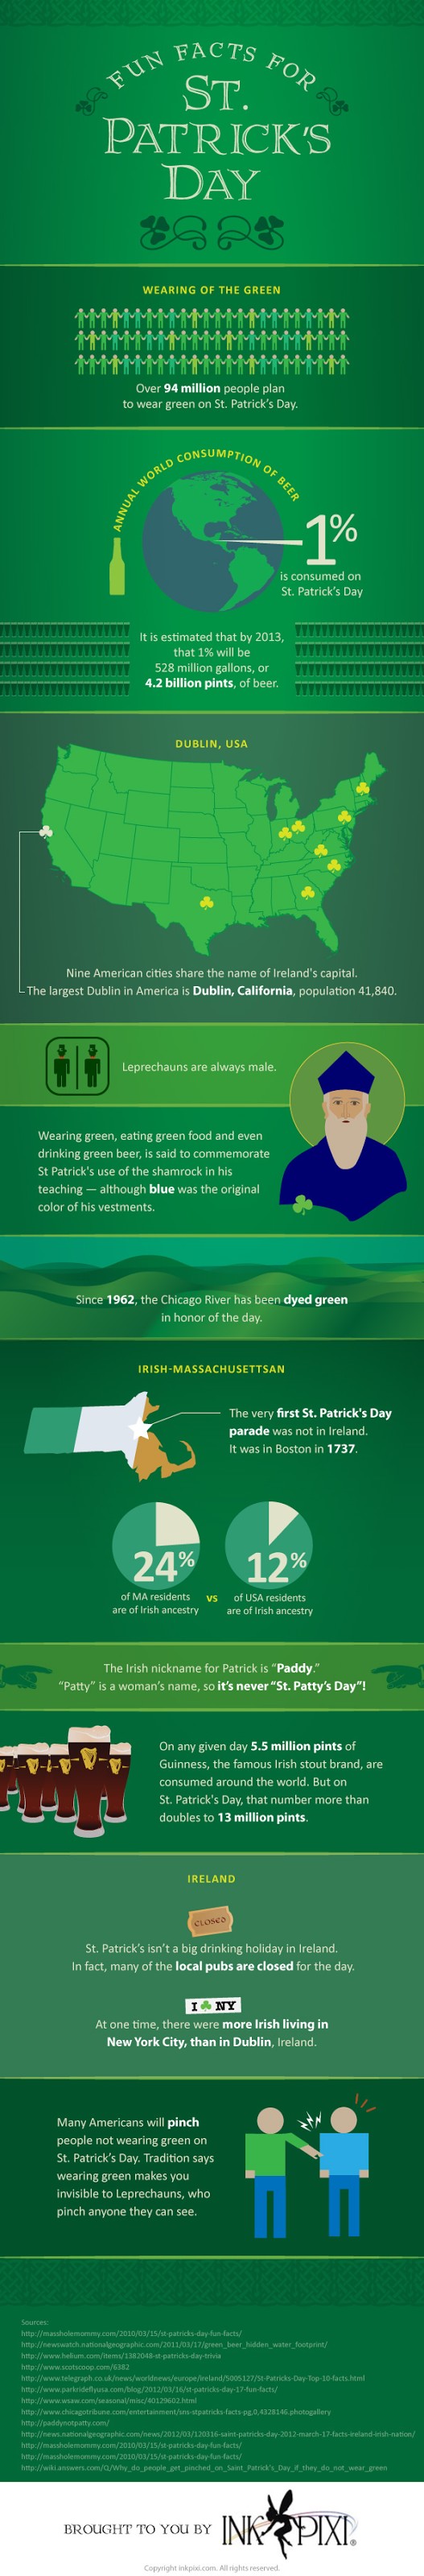 St. Patrick's Day Fun Facts